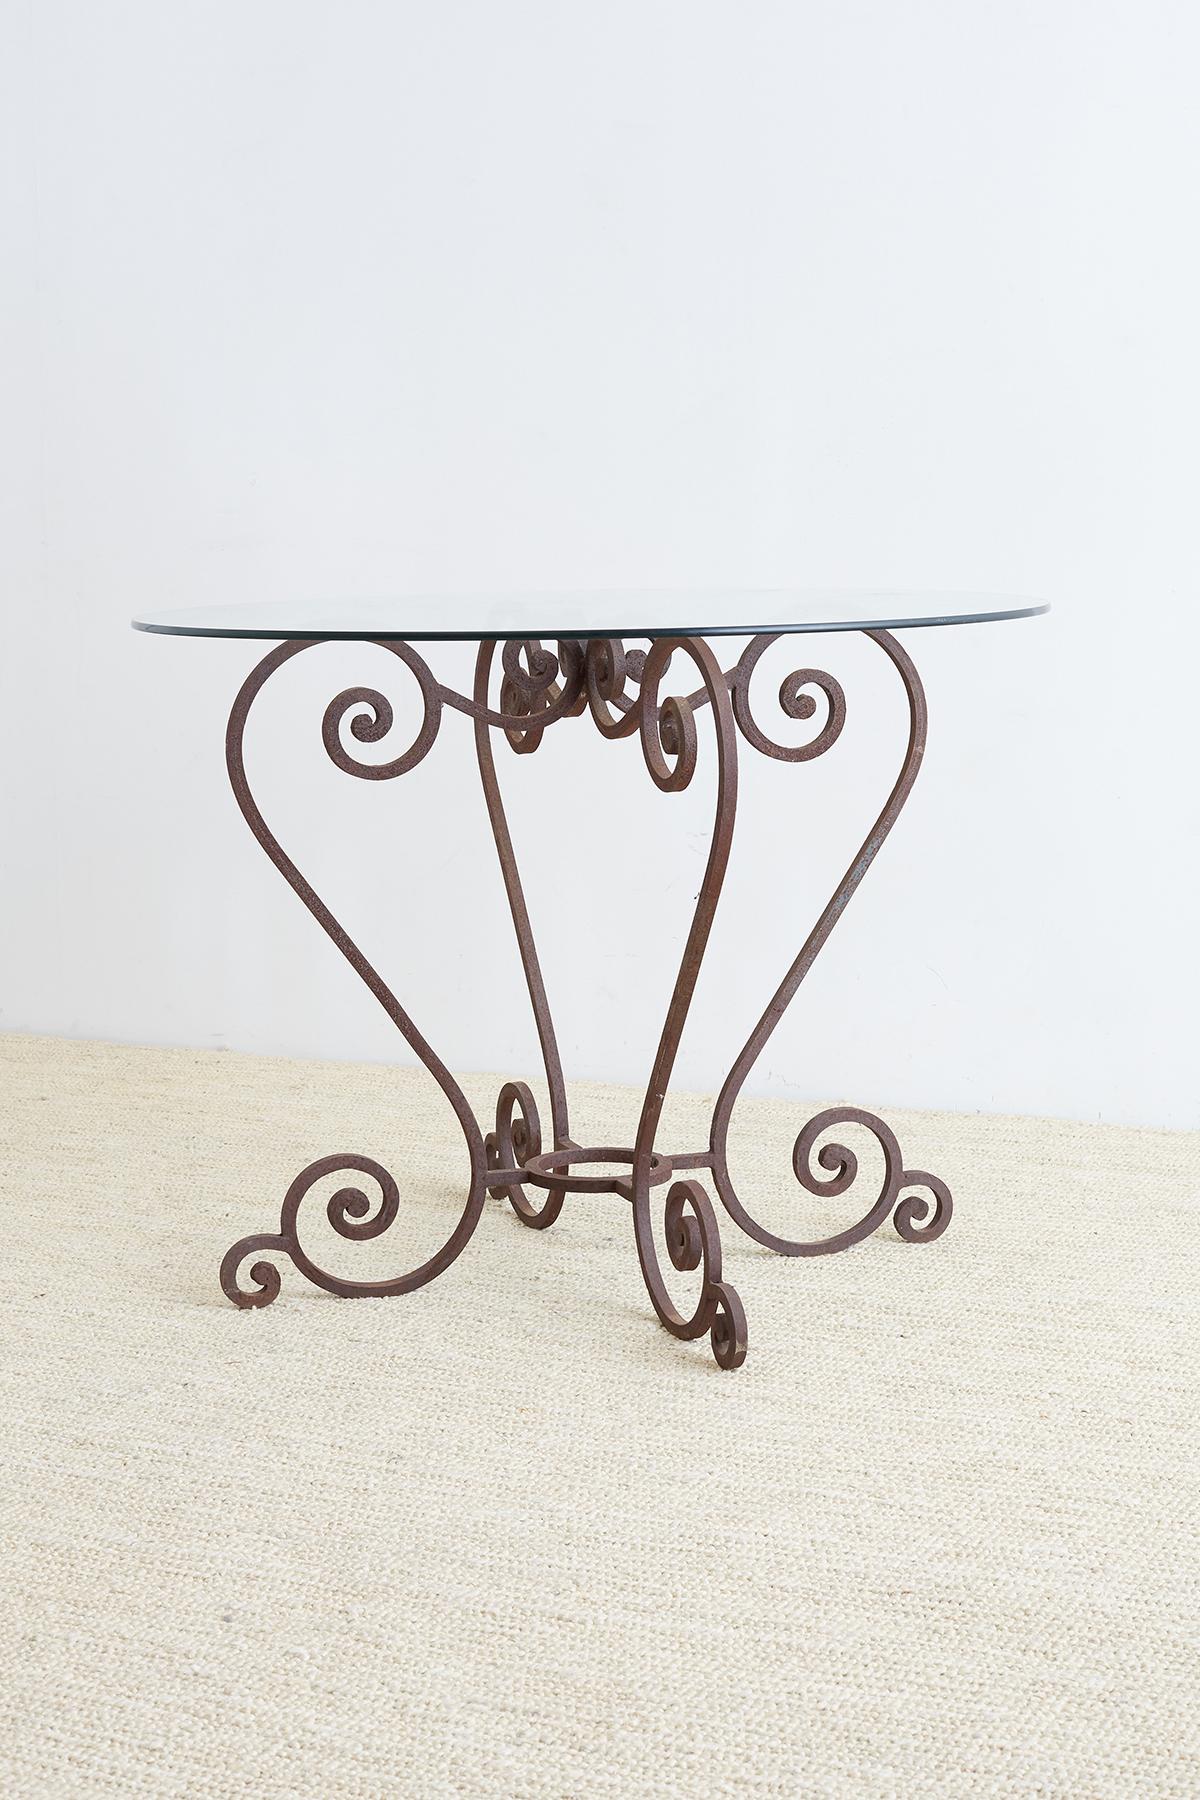 Hollywood Regency Scrolled Wrought Iron Breakfast or Patio Garden Table For Sale